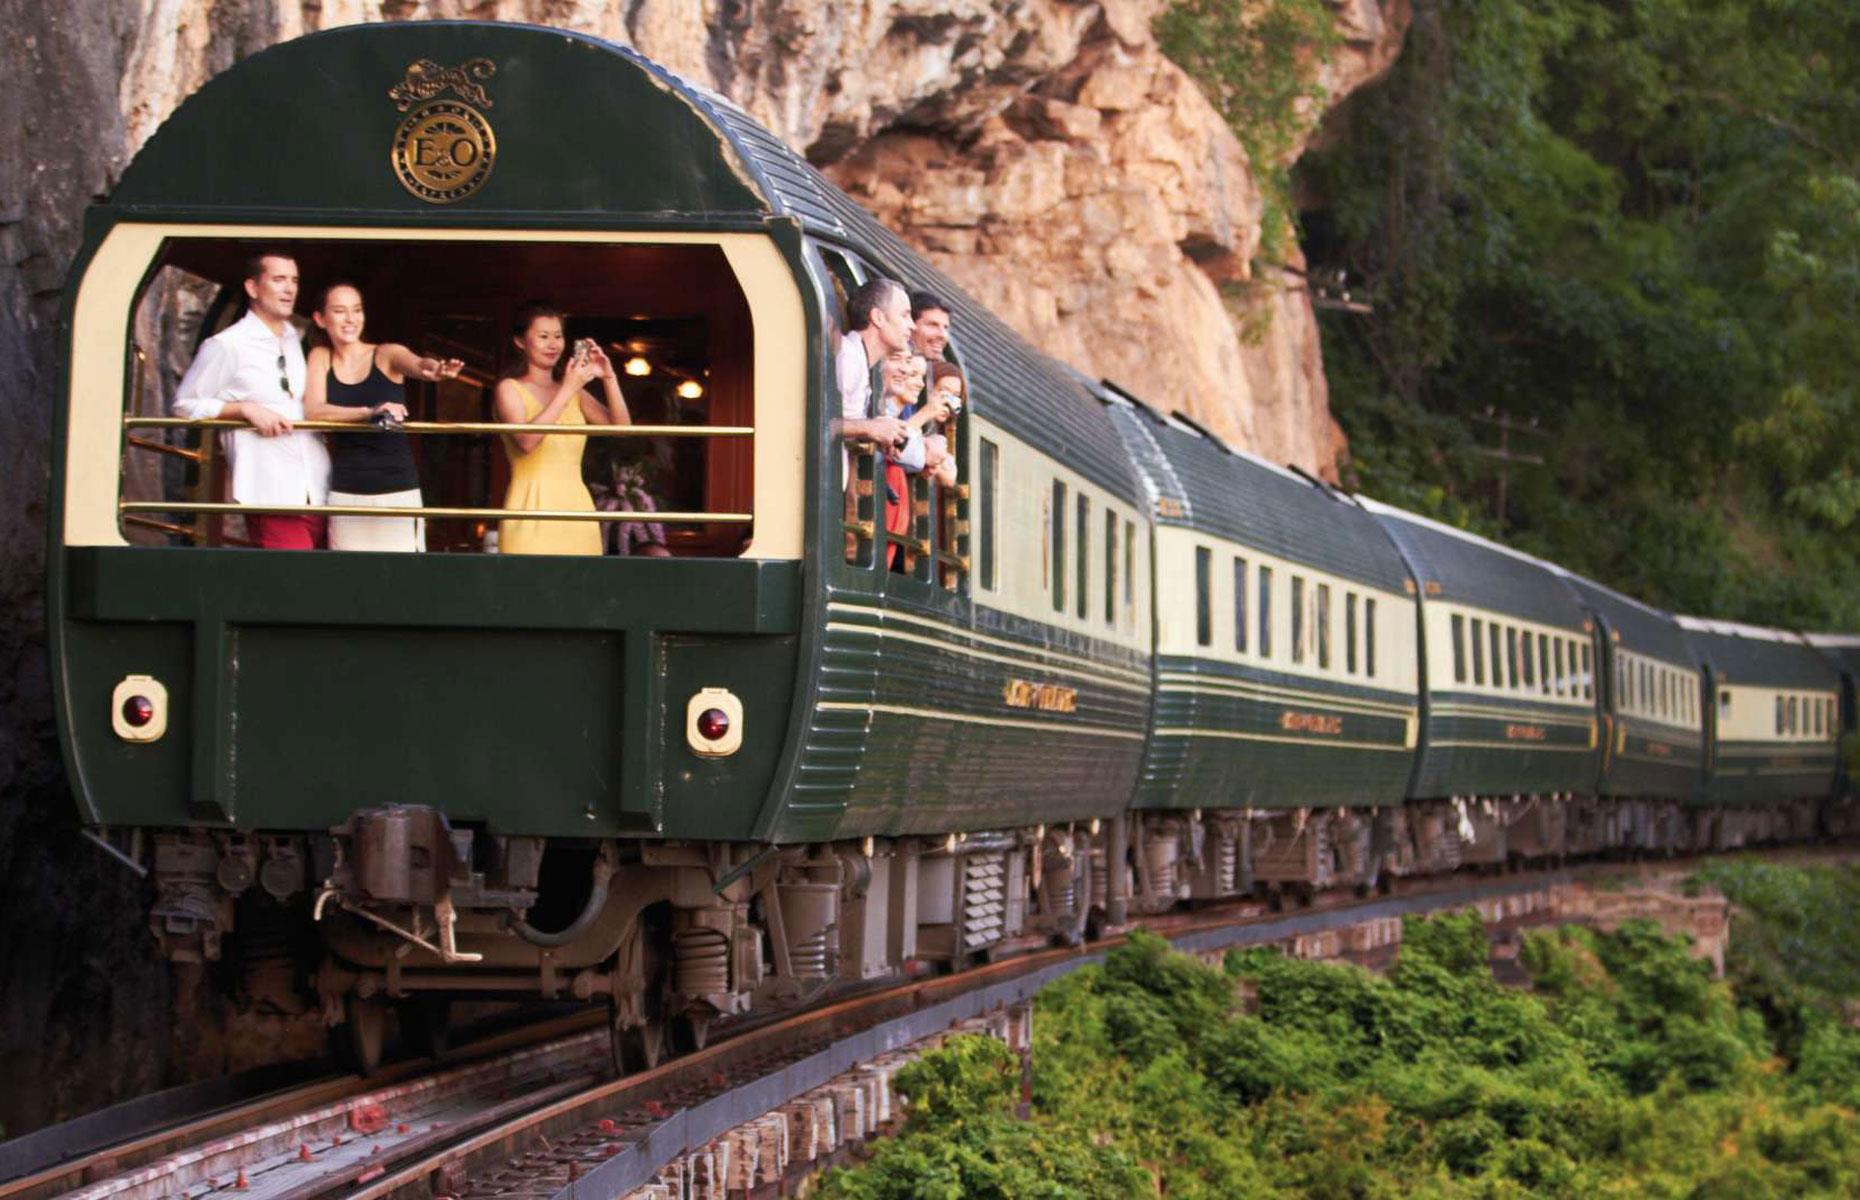 <p>Owned by LVMH, Belmond has an enviable portfolio that includes some of the world's most renowned hotels and restaurants, as well as four of the most prestigious rail experiences: the fabled <em>Venice Simplon-Orient-Express</em>, <em>Royal Scotsman</em>, <em>Andean Explorer</em>, and <em>Eastern & Oriental Express</em>.</p>  <p>The latter, launched in 1972, travels between Singapore, Malaysia, and Thailand. It recently underwent a stunning refurbishment and will return to service in 2024 following a four-year hiatus.</p>